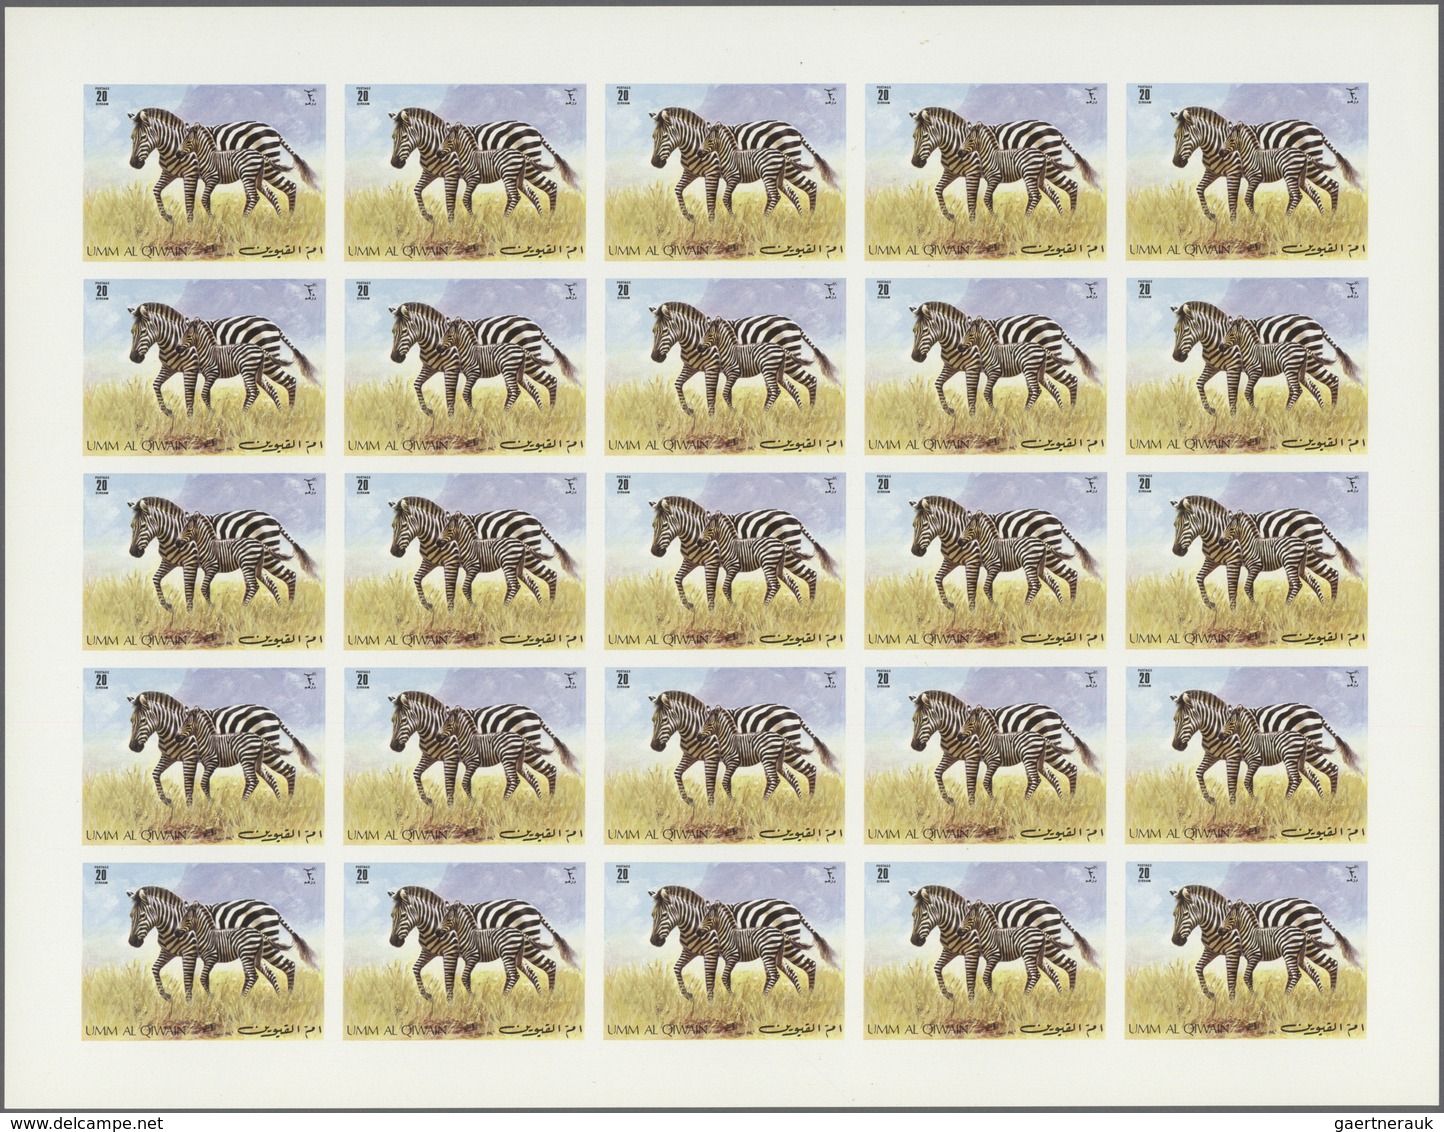 10049 Umm al Qaiwain: 1971, Wild Animals, 10dh. to 5r., complete set of five values perf./imperf., sheets